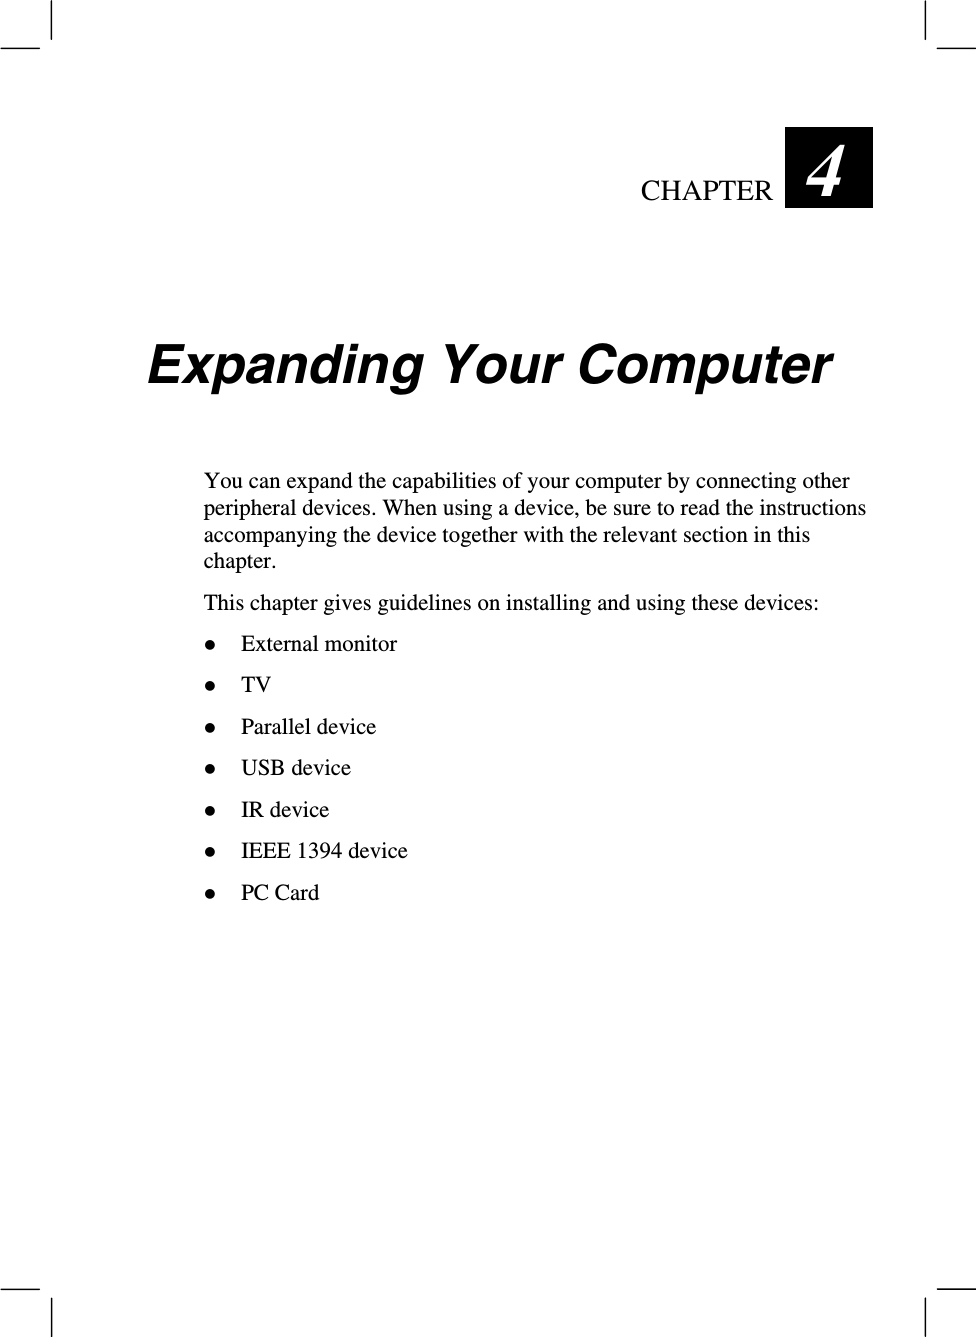 CHAPTER  4 Expanding Your ComputerYou can expand the capabilities of your computer by connecting otherperipheral devices. When using a device, be sure to read the instructionsaccompanying the device together with the relevant section in thischapter.This chapter gives guidelines on installing and using these devices:z External monitorz TVz Parallel devicez USB devicez IR devicez IEEE 1394 devicez PC Card